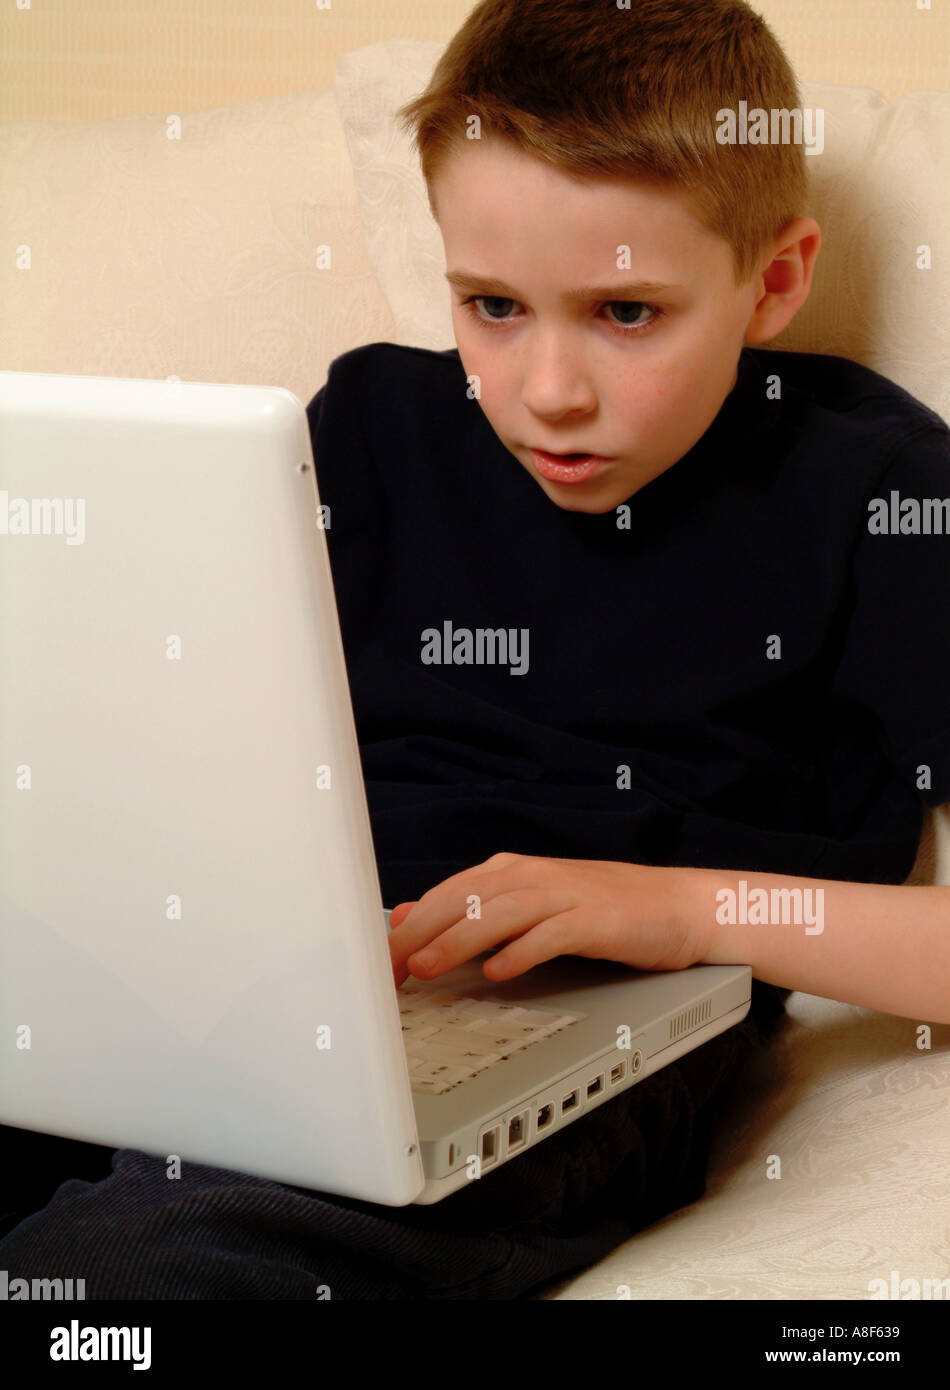 8 year old boy with a laptop computer Stock Photo